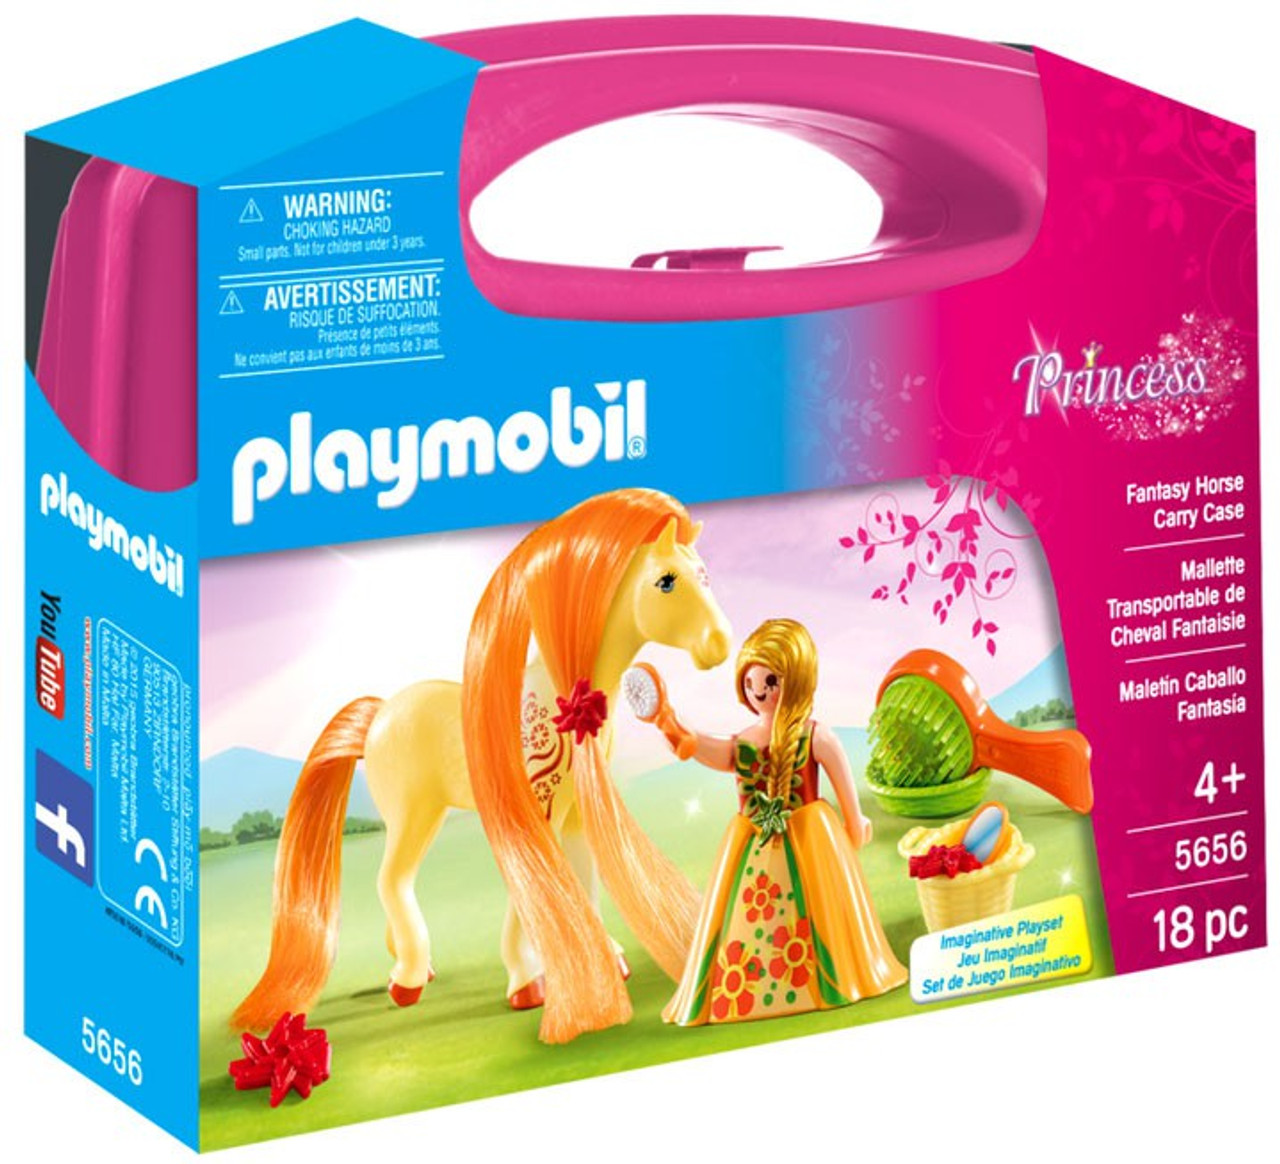 Playmobil Princess Fantasy Horse Carry Case Set 5656 Toywiz - roblox the golden bloxy award action figure new sealed